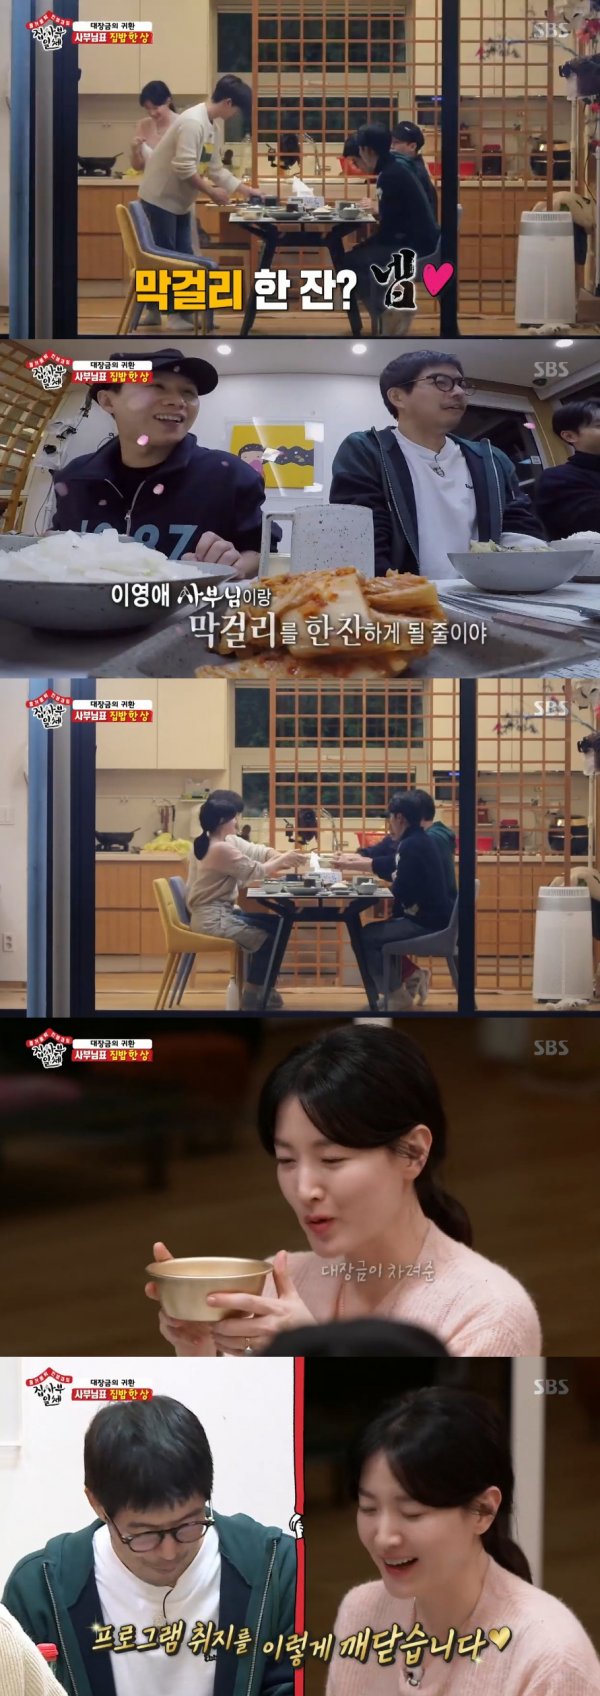 Man in the Kitchen of All The Butlers Lee Yeong-ae has been released.On the SBS entertainment program All The Butlers, which was broadcast on the afternoon of the 1st, members of Lee Yeong-aes house were pictured eating rice.Lee Seung-gi said, I did not imagine it, I was invited to the house, when I saw Lee Yeong-aes Man in the Kitchen.After Lee Yeong-ae recommended makgeolli, Yang Se-hyeong did not hide his trembling mind that he had a drink of makgeolli with Master Lee Yeong-ae.Lee Yeong-ae looked at the members and said, Please eat a lot because it is good for your health. Lee Seung-gi once again laughed, saying, I can not believe it.